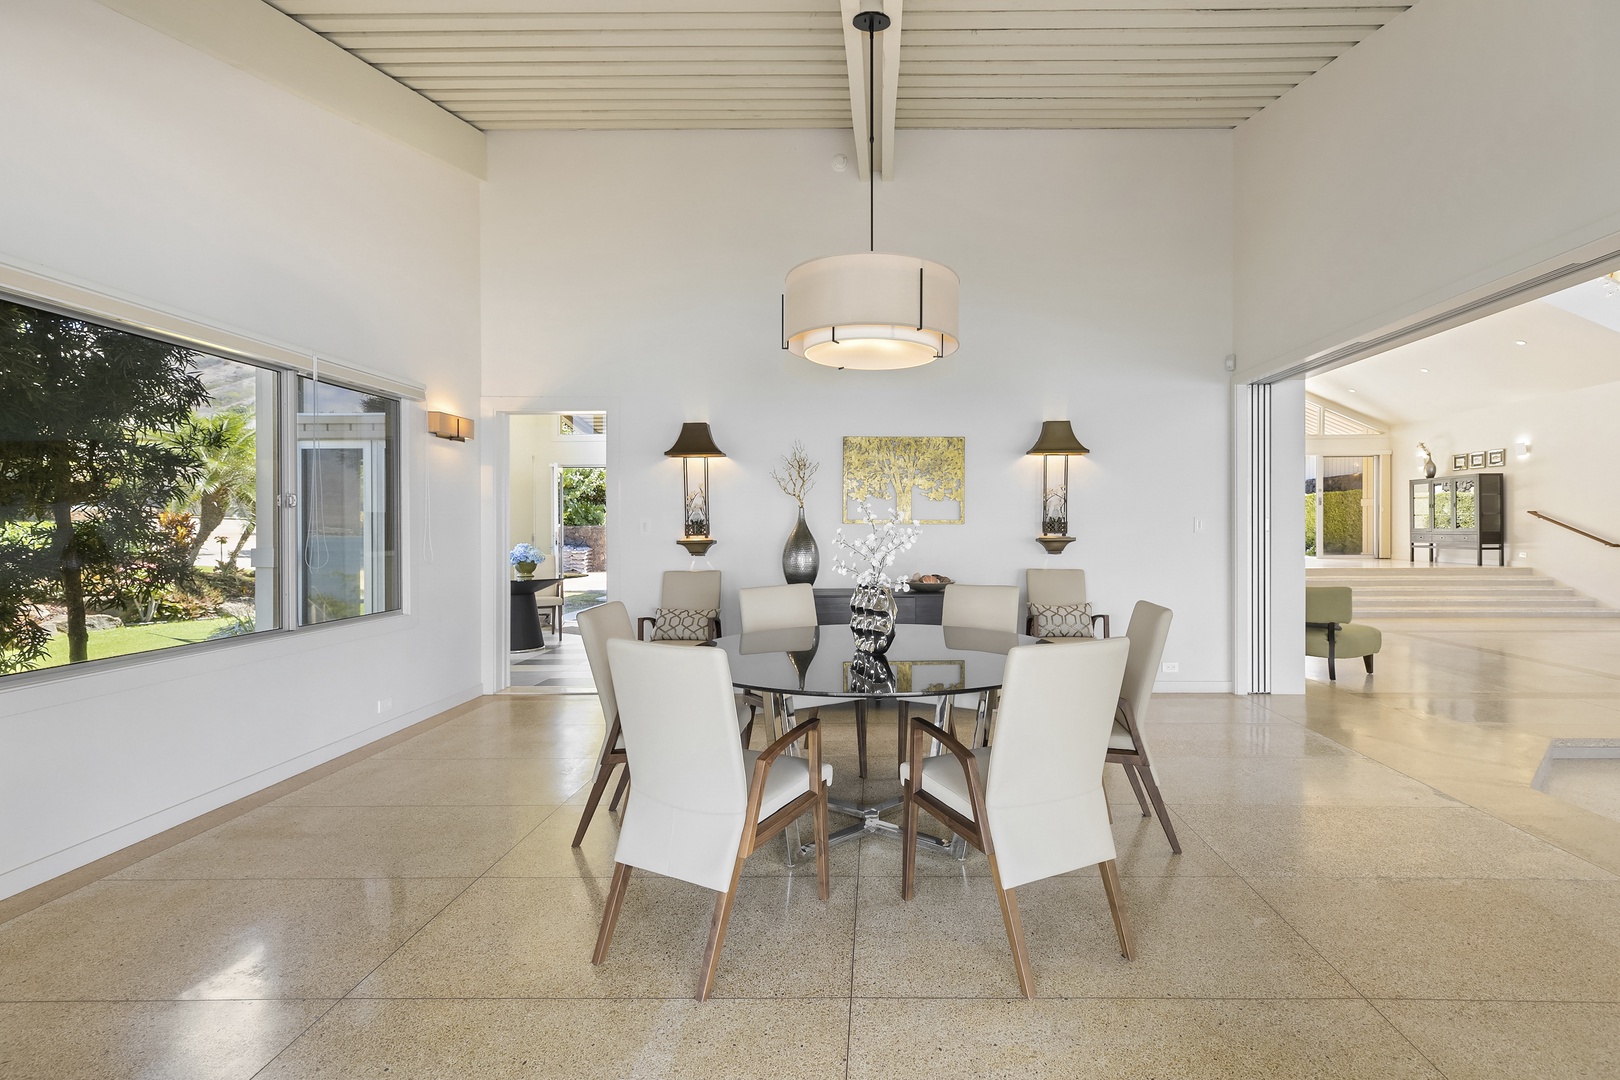 Honolulu Vacation Rentals, Hanapepe House - Dining room with Sliding Divider Doors